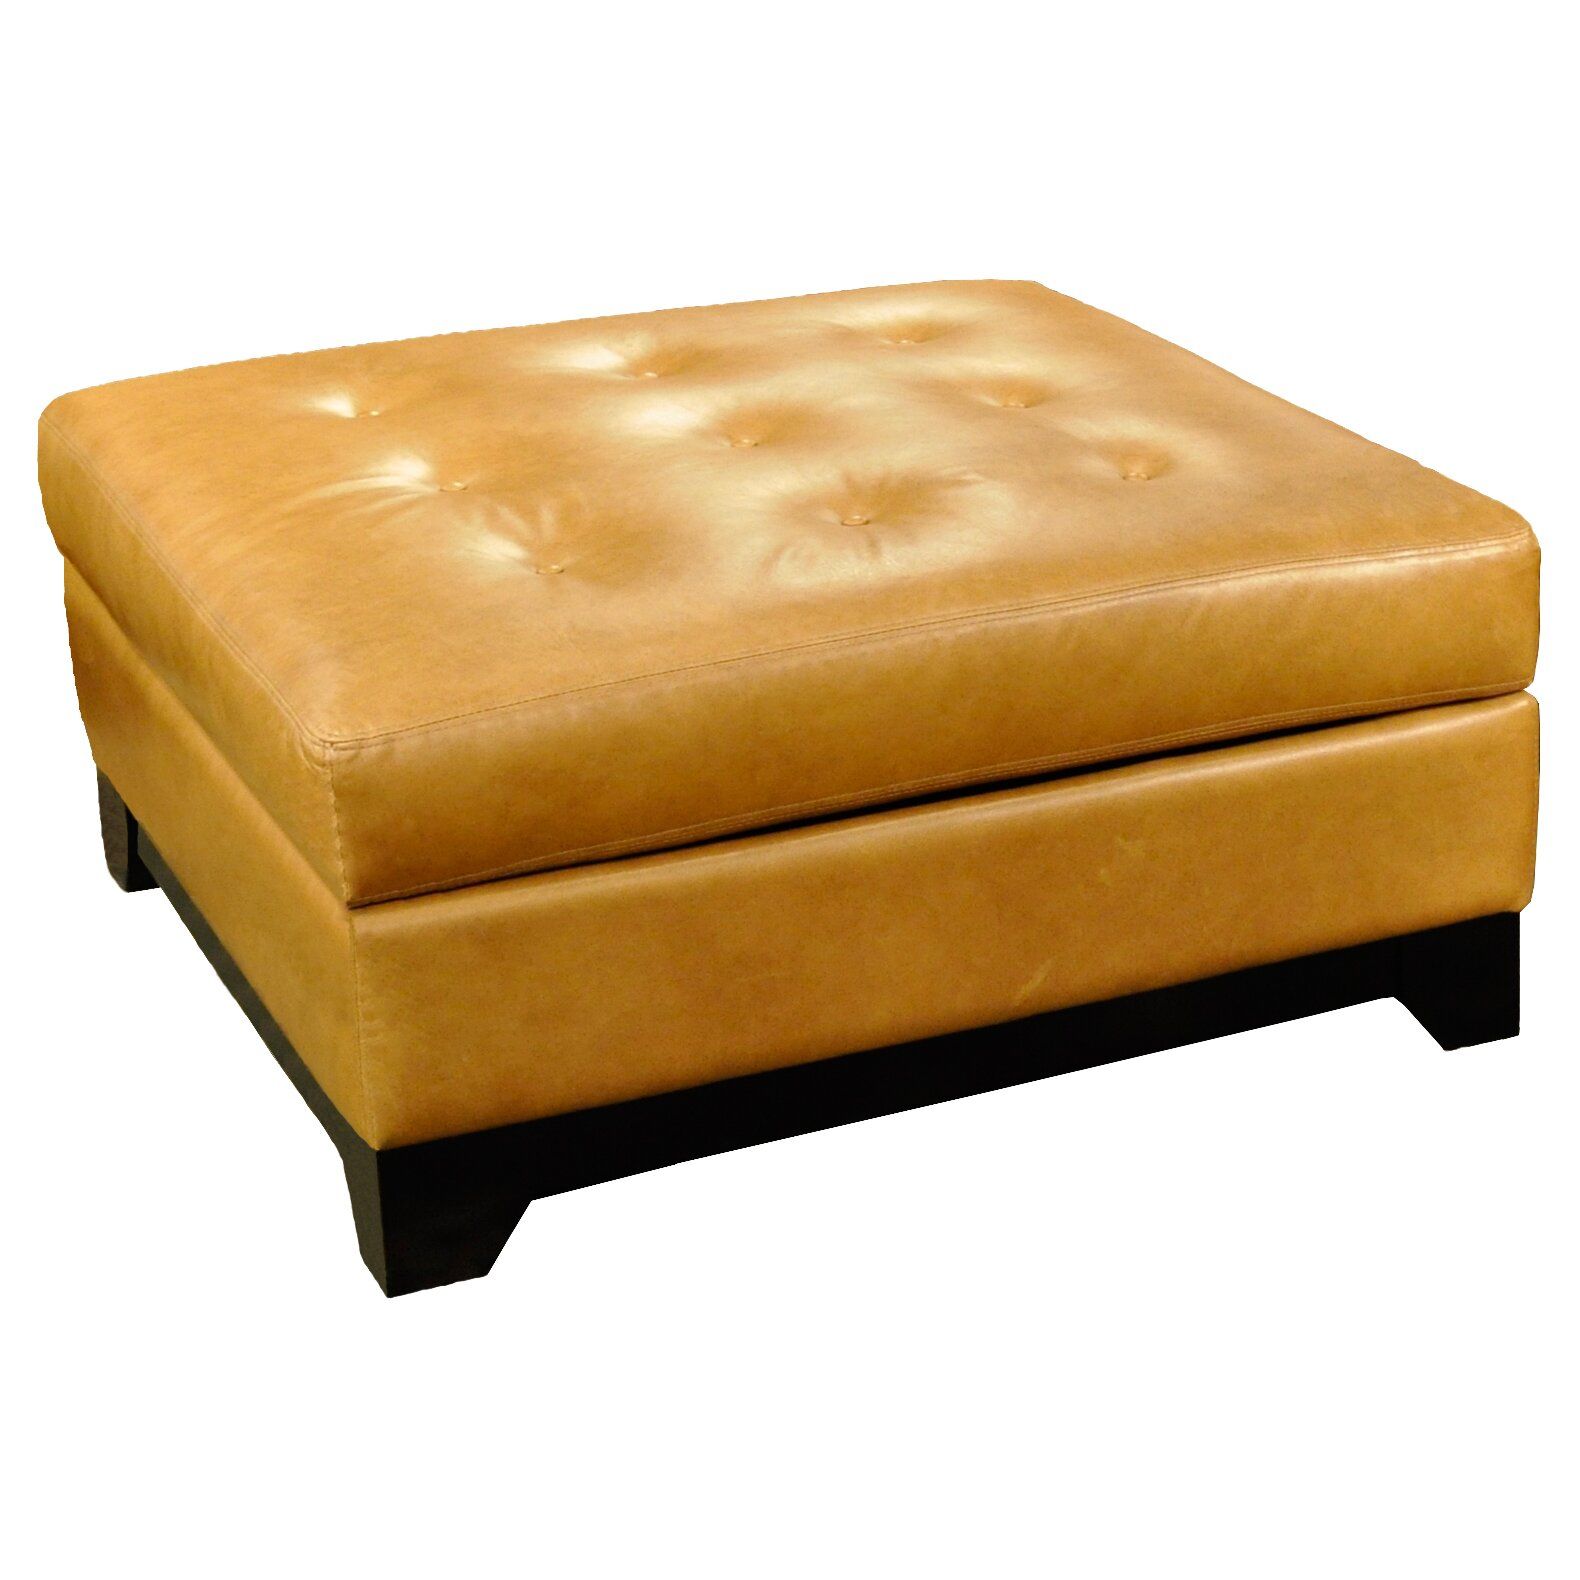 Omnia Leather Espasio Leather Cocktail Ottoman & Reviews | Wayfair For Multi Color Botanical Fabric Cocktail Square Ottomans (View 2 of 20)